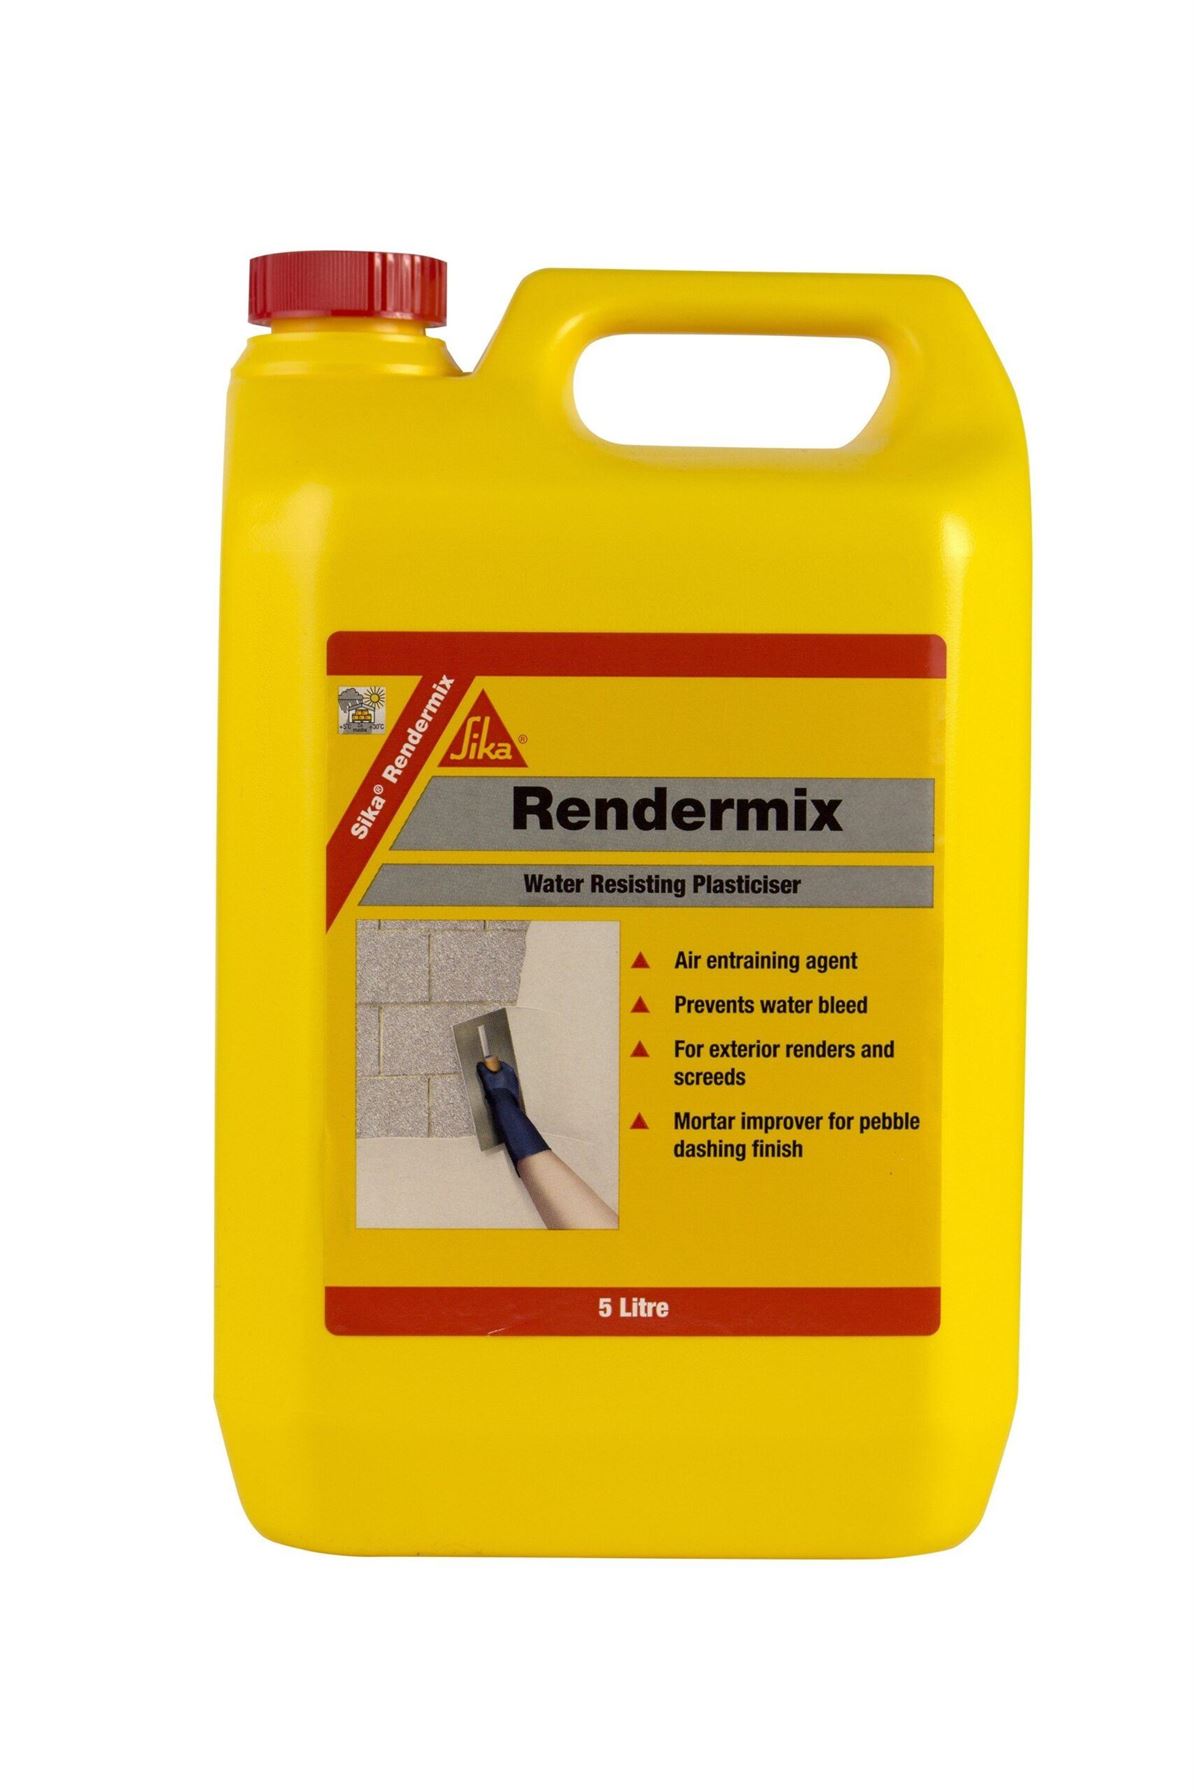 Sika Rendermix 5L Only £8.49 - FREE Delivery & Bulk Discounts | SPC